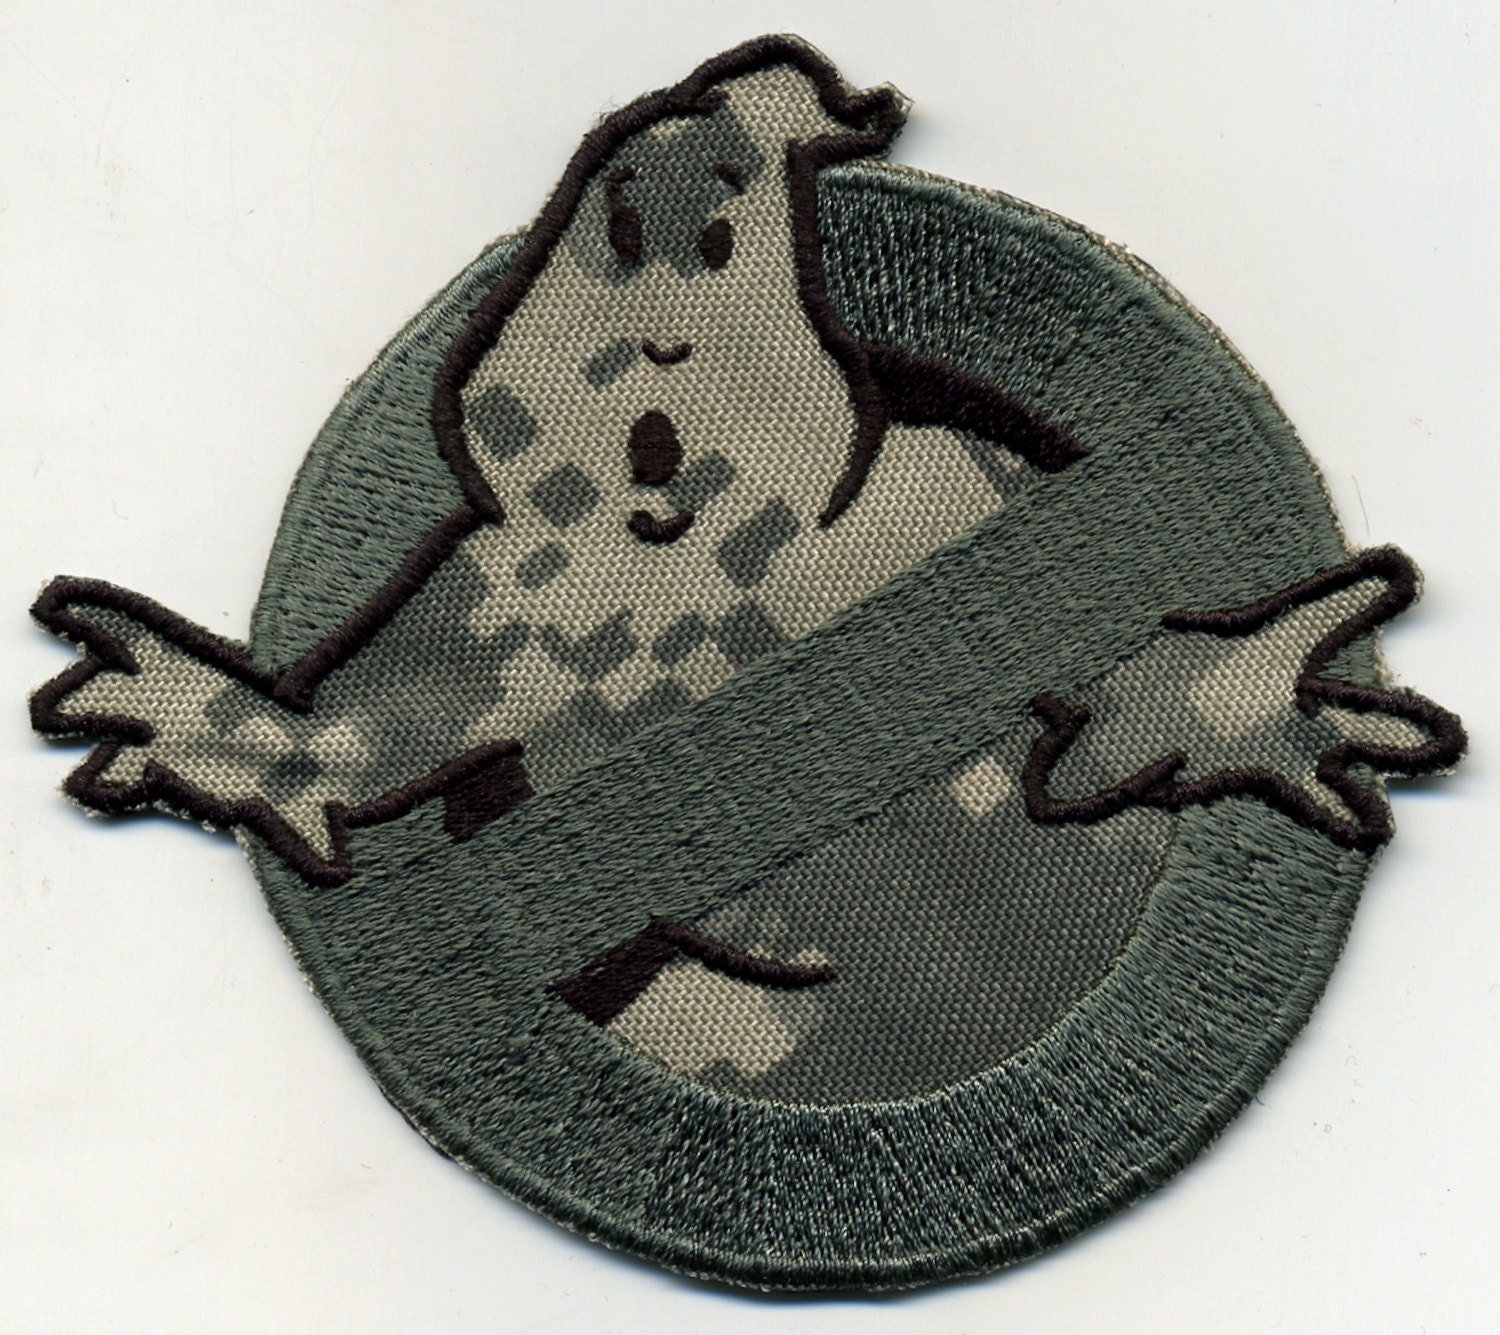 Tan & Brown Embroidered Ghostbusters 1 Style No Ghost Patch w/ HOOK backing 